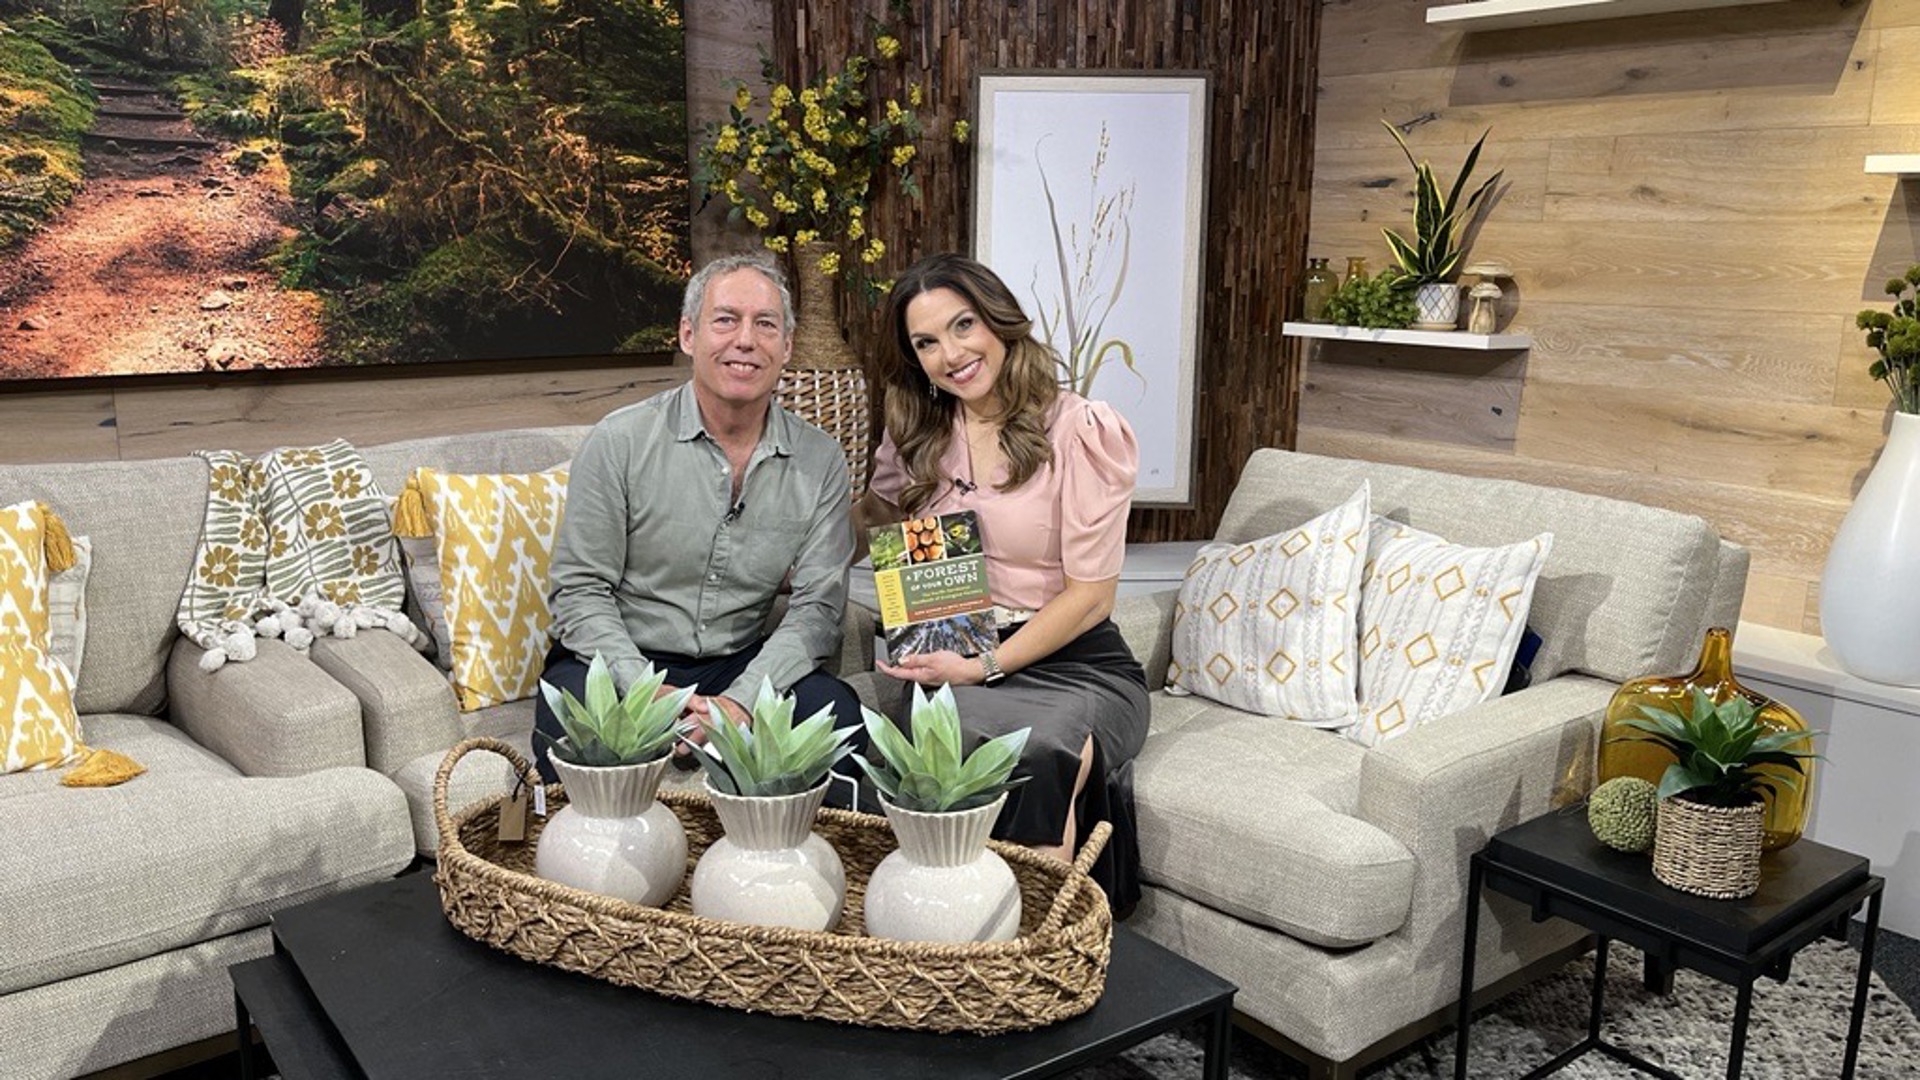 Seth Zuckerman explains the importance of wildlife preservation in "A Forest of Your Own - The Pacific Northwest Handbook of Ecological Forestry." #newdaynw